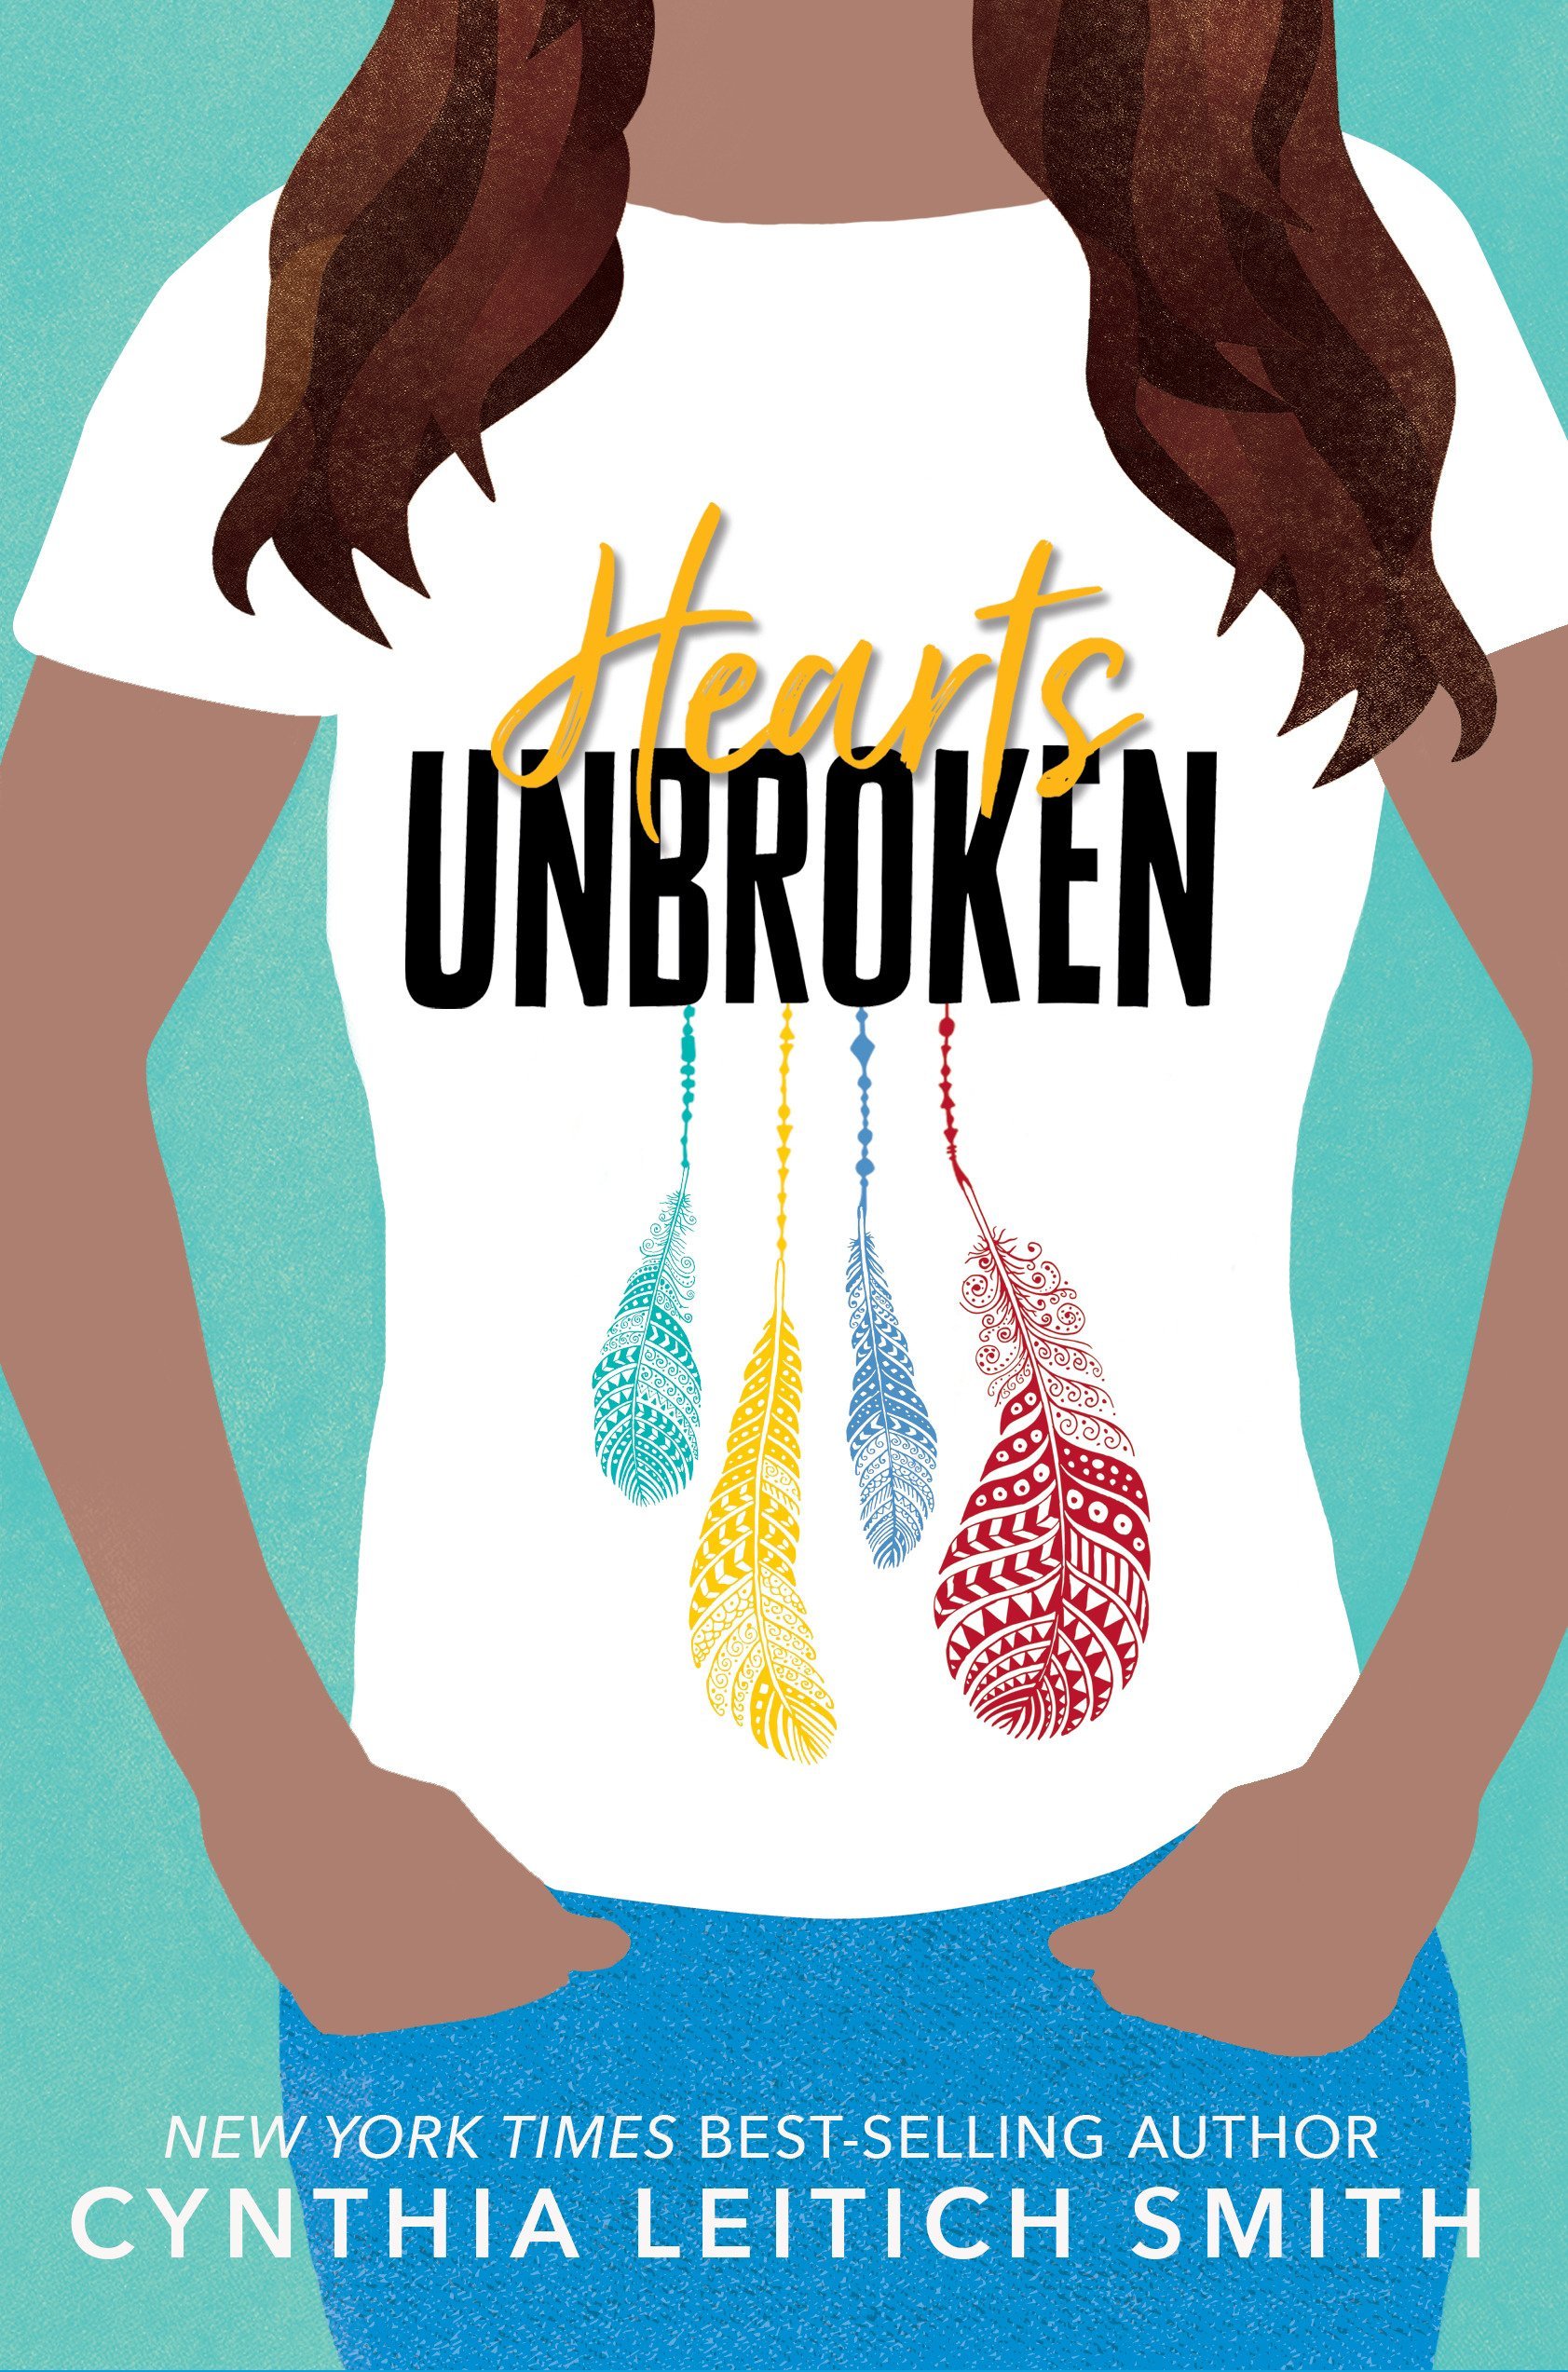 Book cover featuring an illustration of a person with brown skin and long brown hair showing from the neck-down wearing a white T-shirt with feathers printed on it.